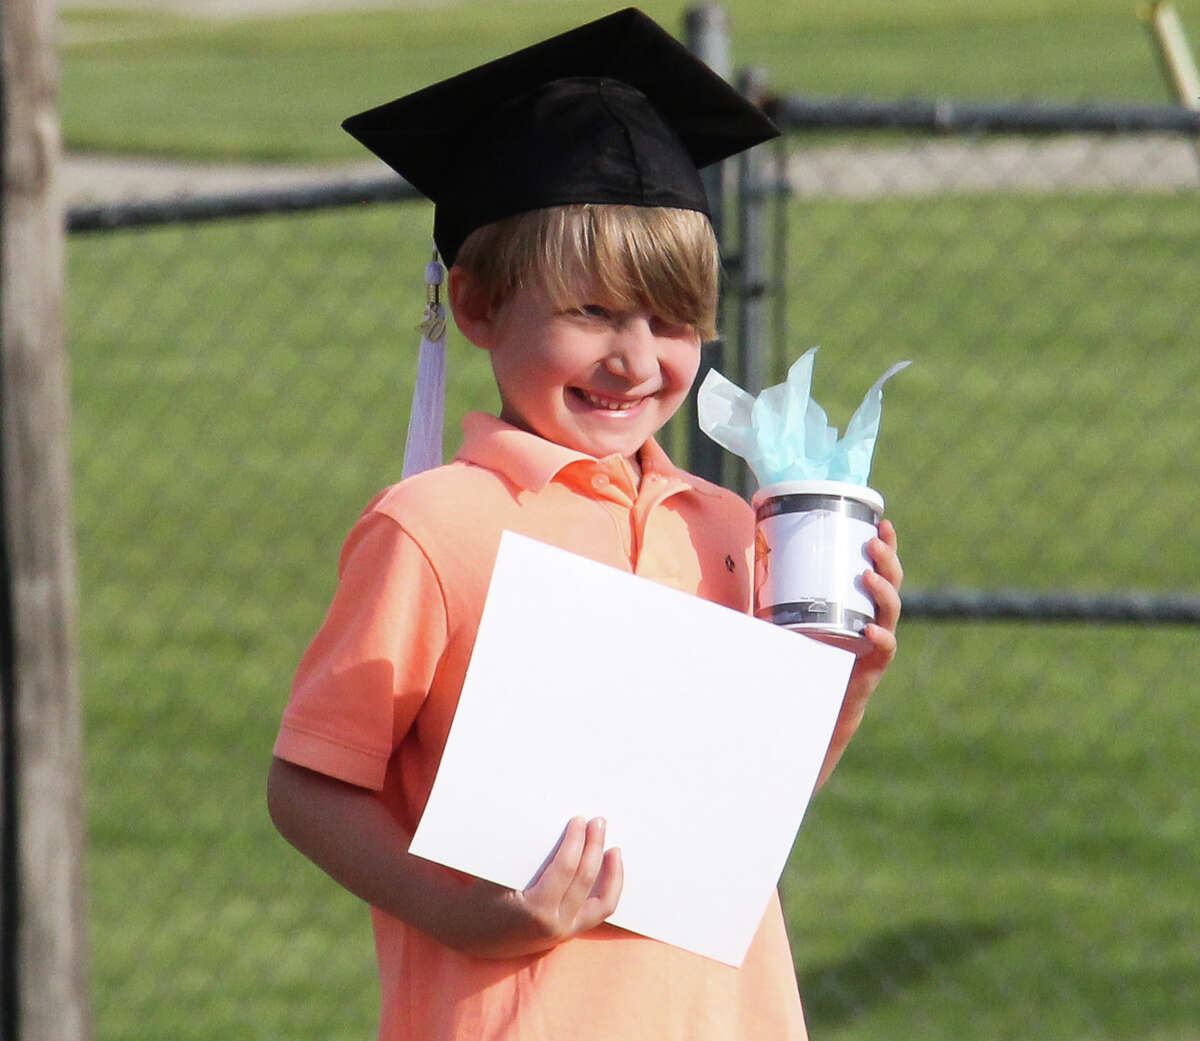 Ubly Community Schools held its kindergarten graduation on Friday, June 5, 2020. The drive-in style event featured two classes of 22 students for a total of 44 graduates.